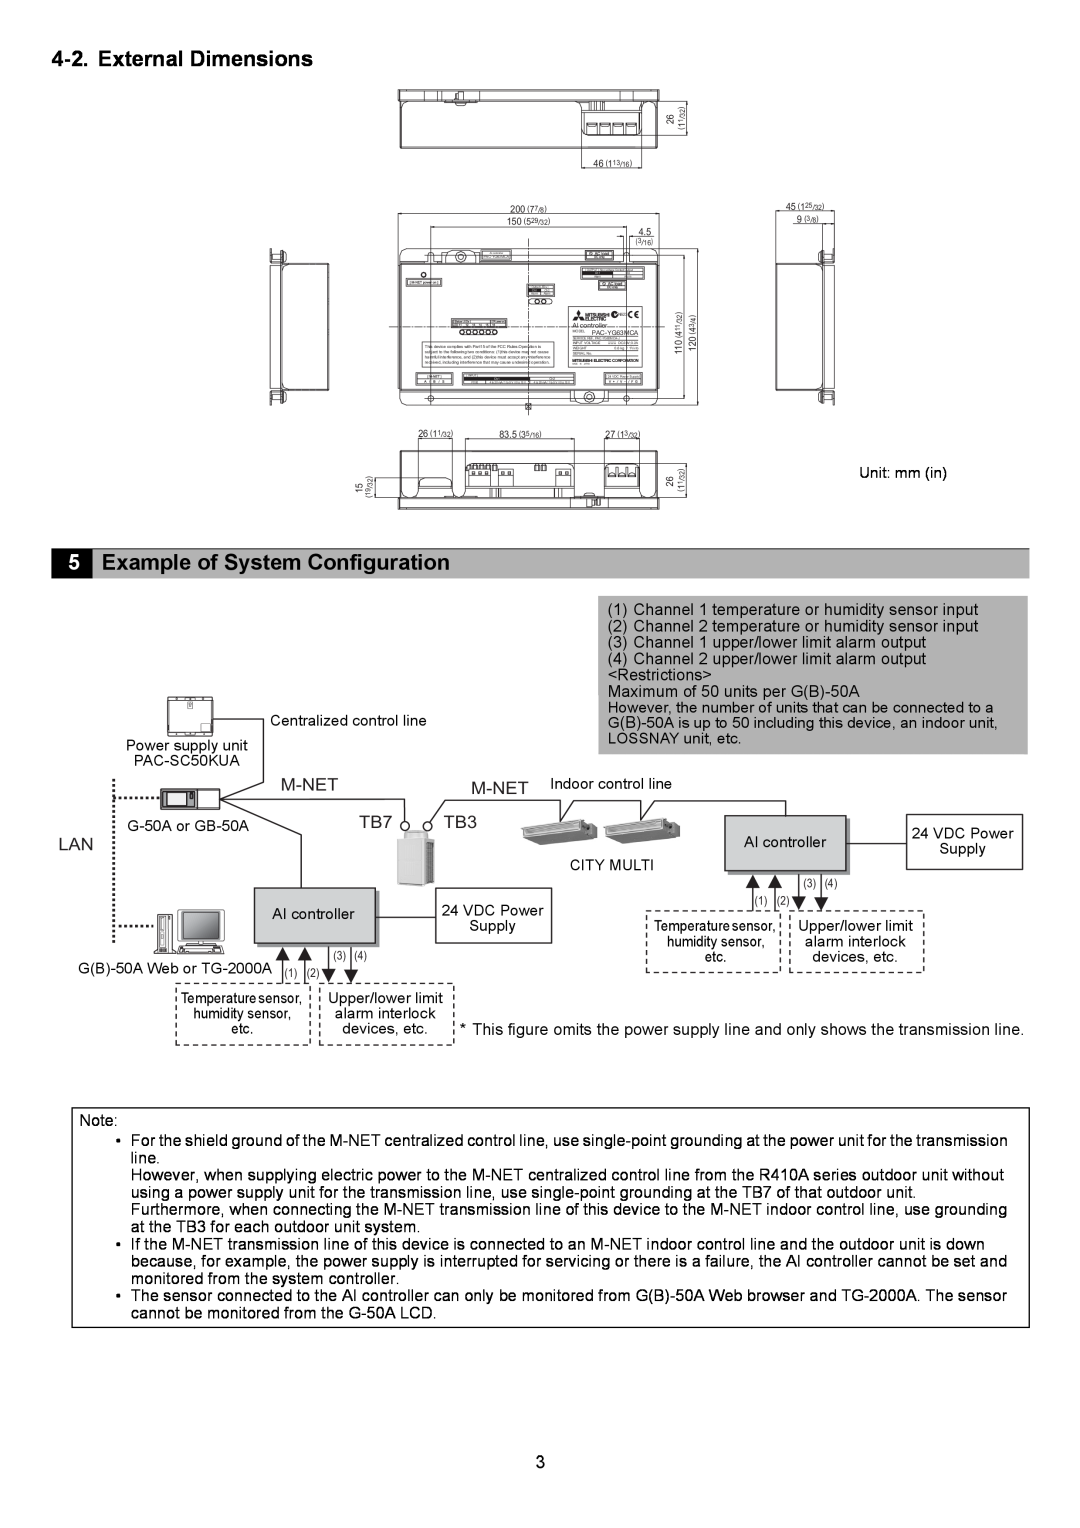 Mitsubishi Electronics PAC-YG63MCA instruction manual External Dimensions, Example of System Configuration 